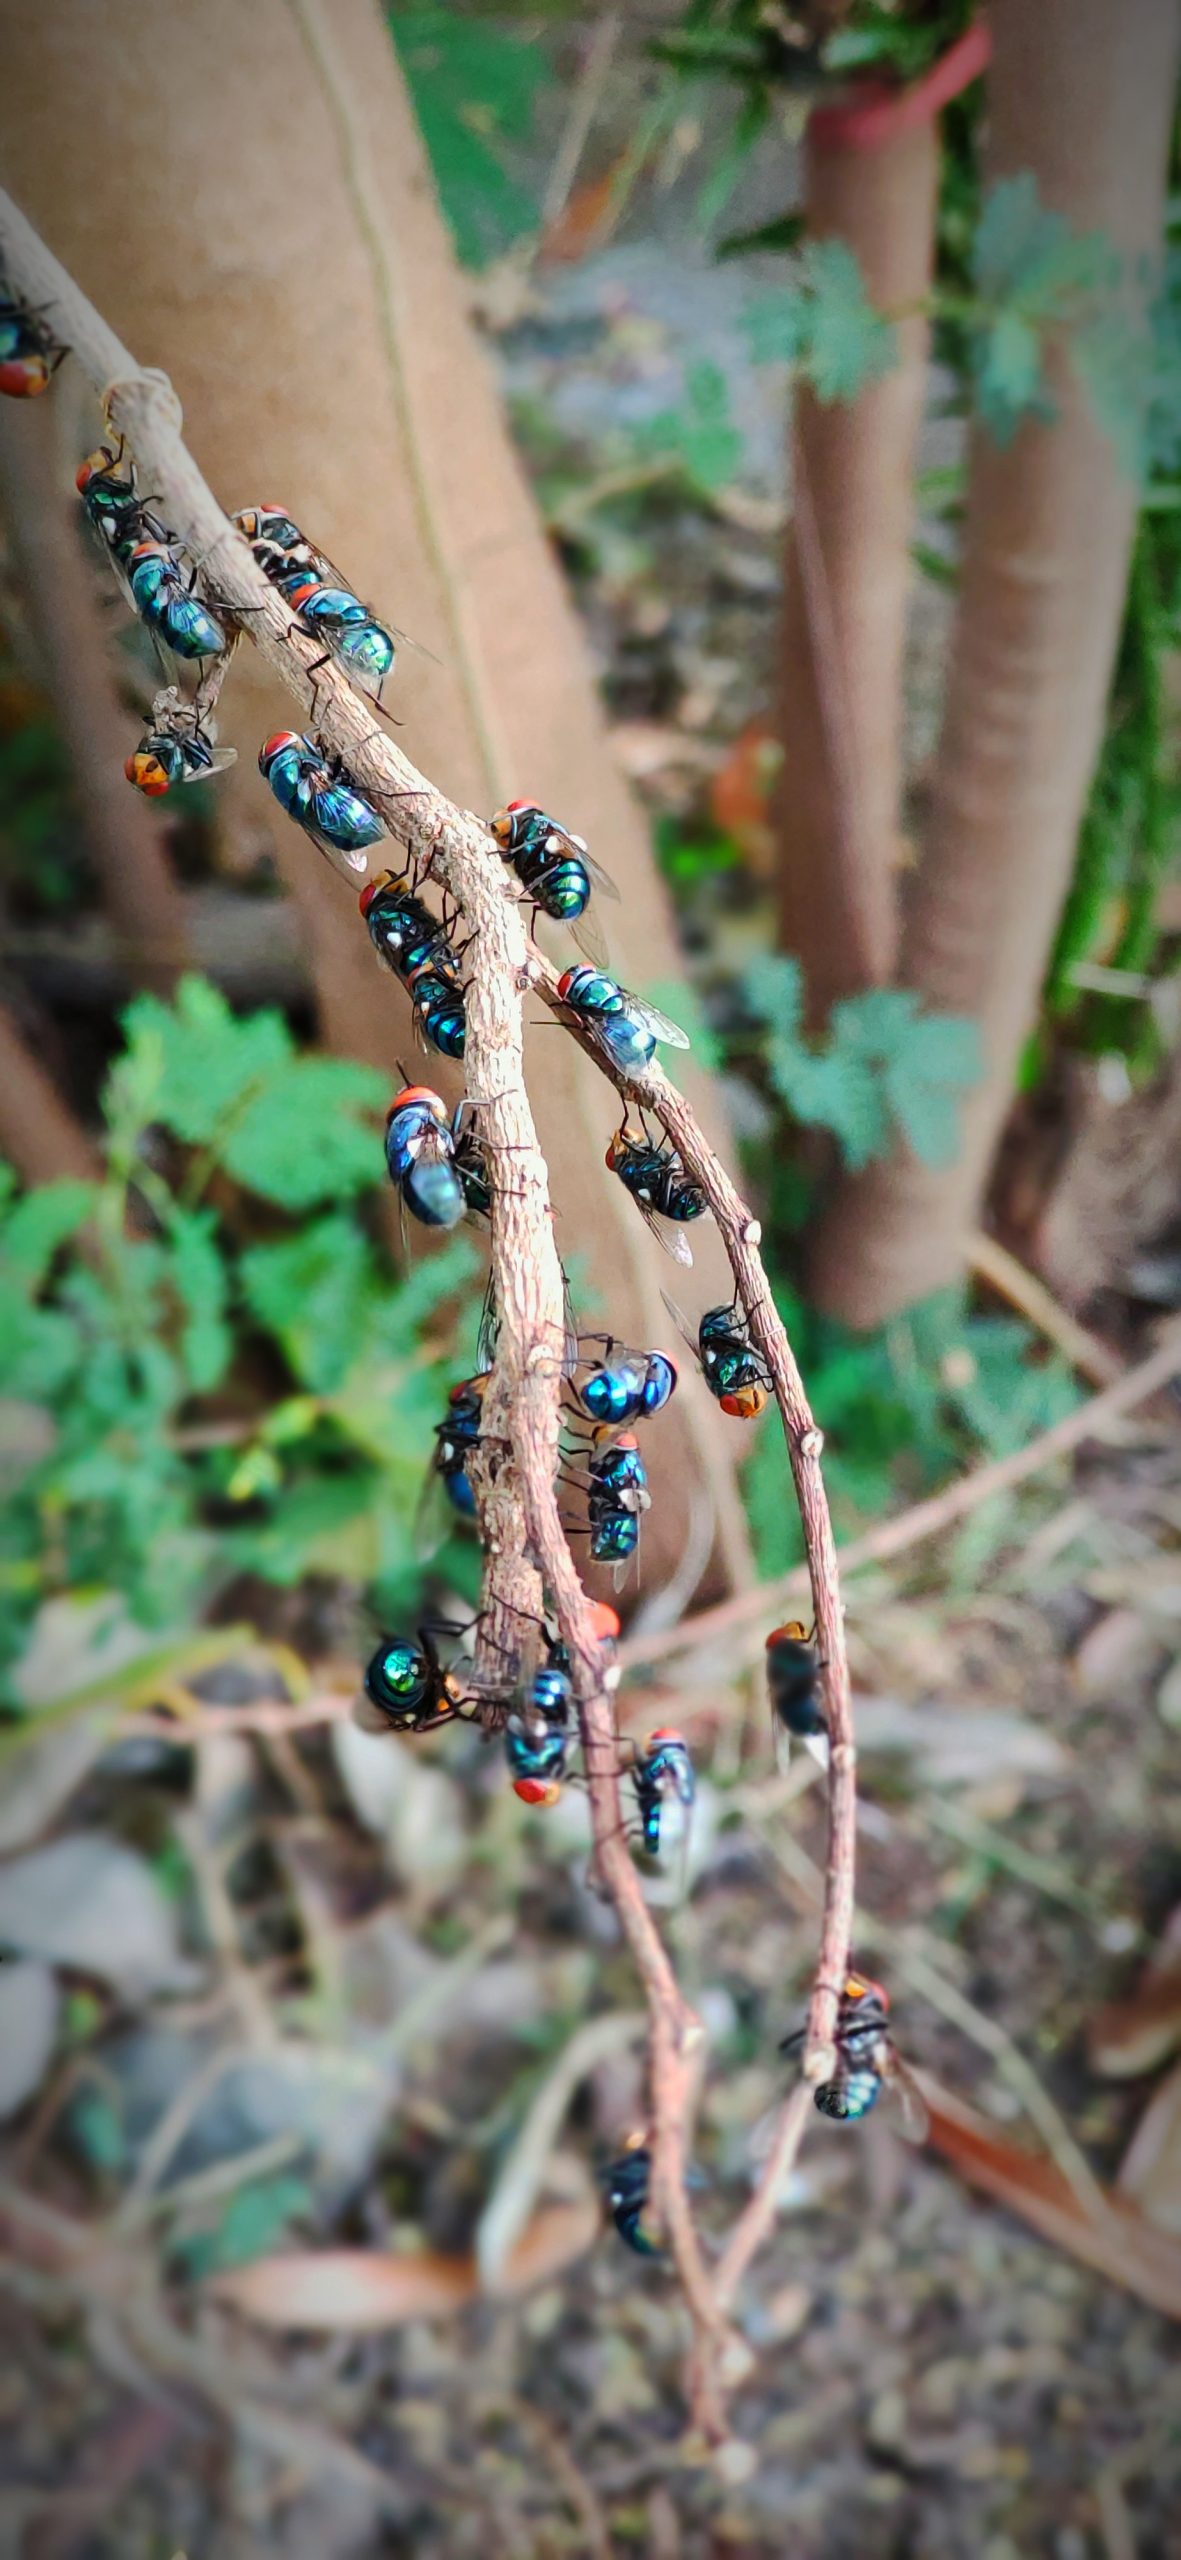 Bees on twig